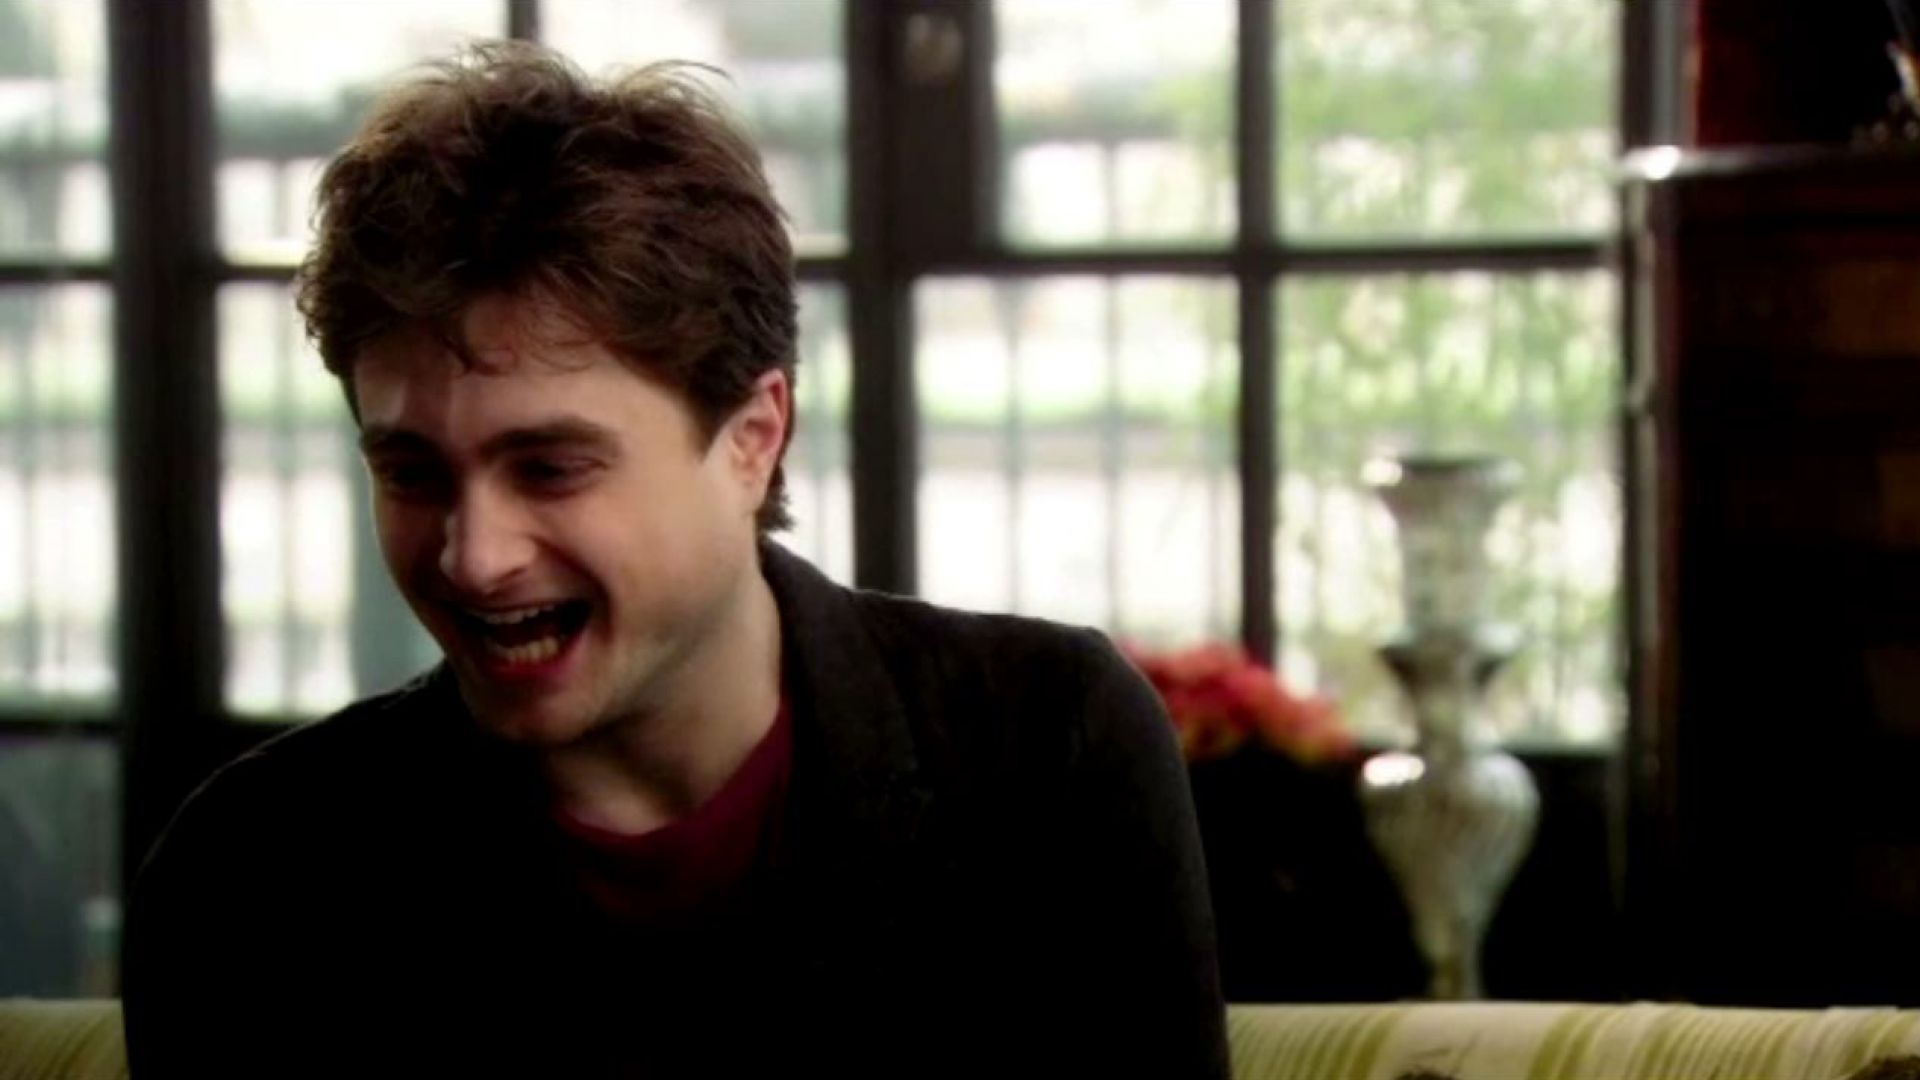 Daniel Radcliffe tells the bizarre story of his casting in Harry Potter